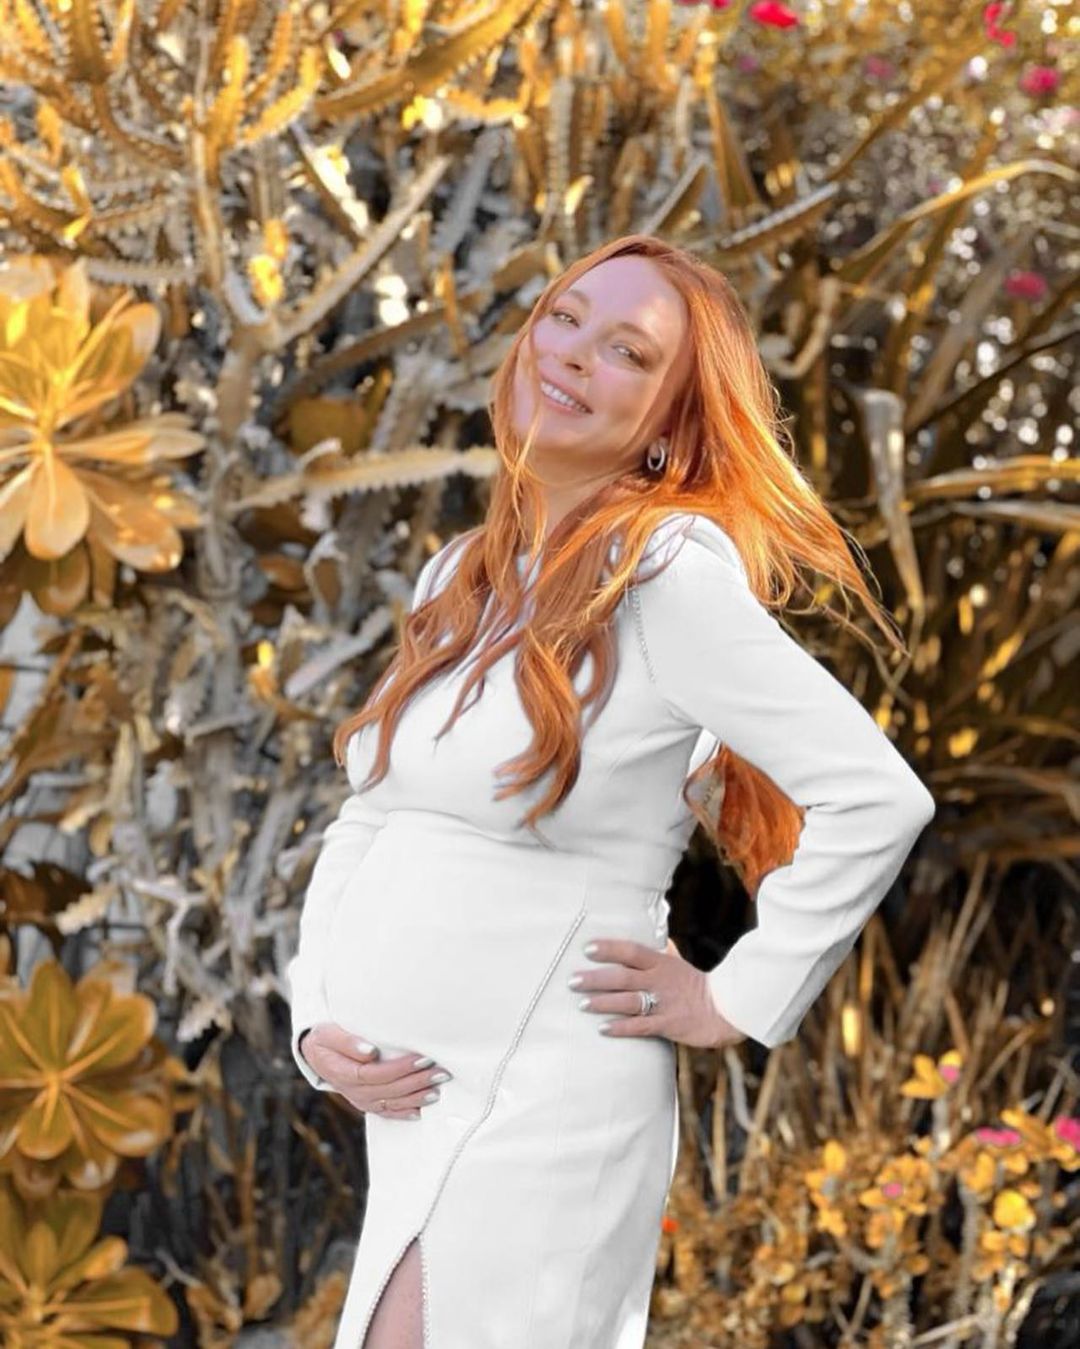 Lindsay Lohan Lays Back With Her Growing Bump! - Photo 4